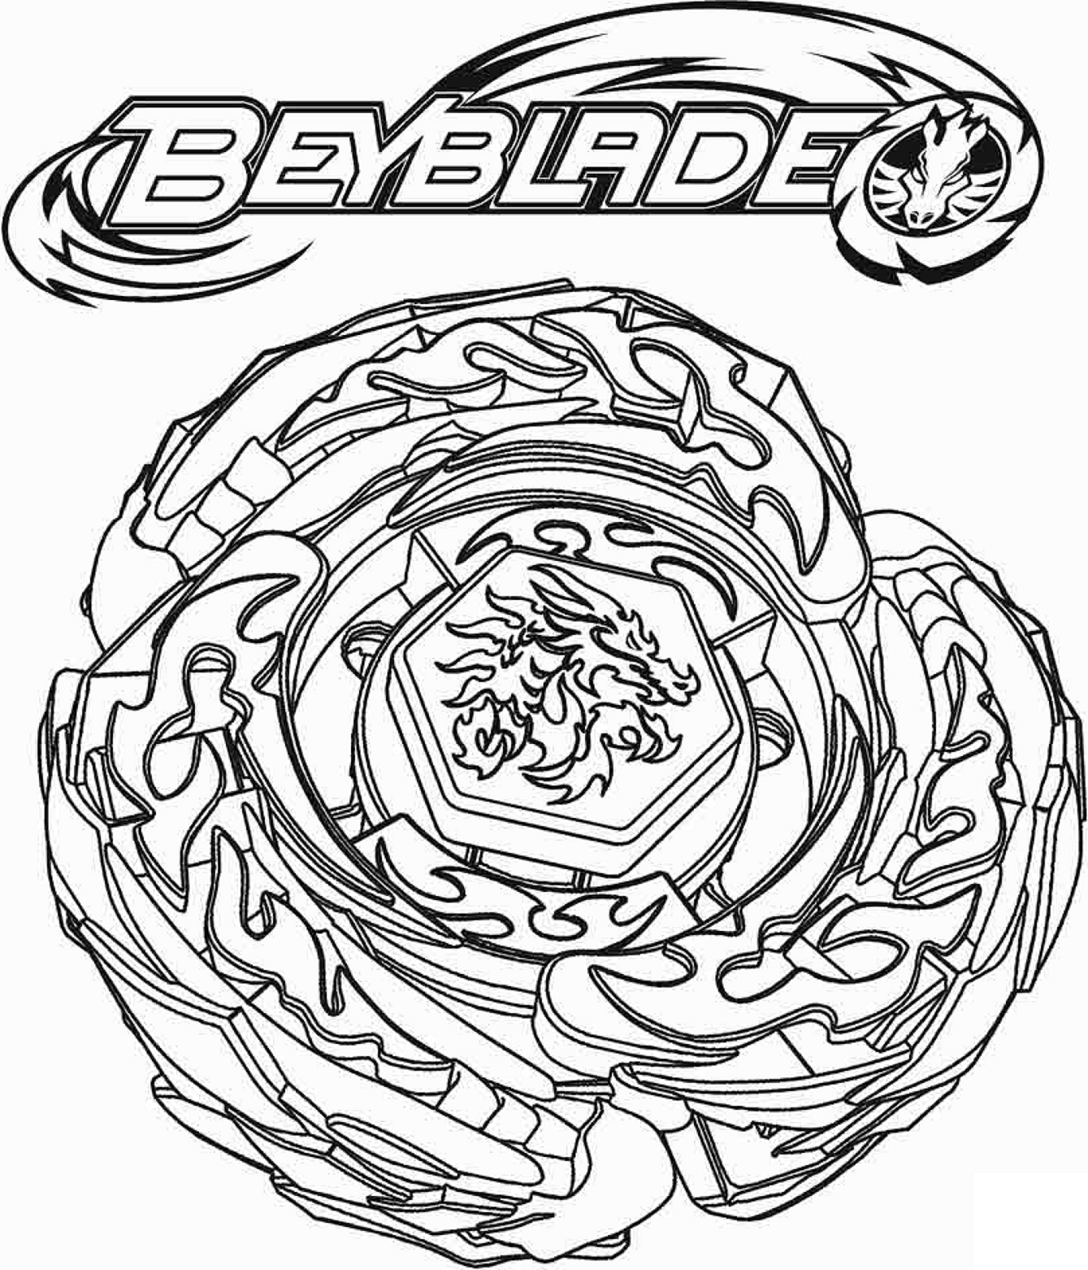 Beyblade Lightning L Drago Coloring Page - Free Printable Coloring